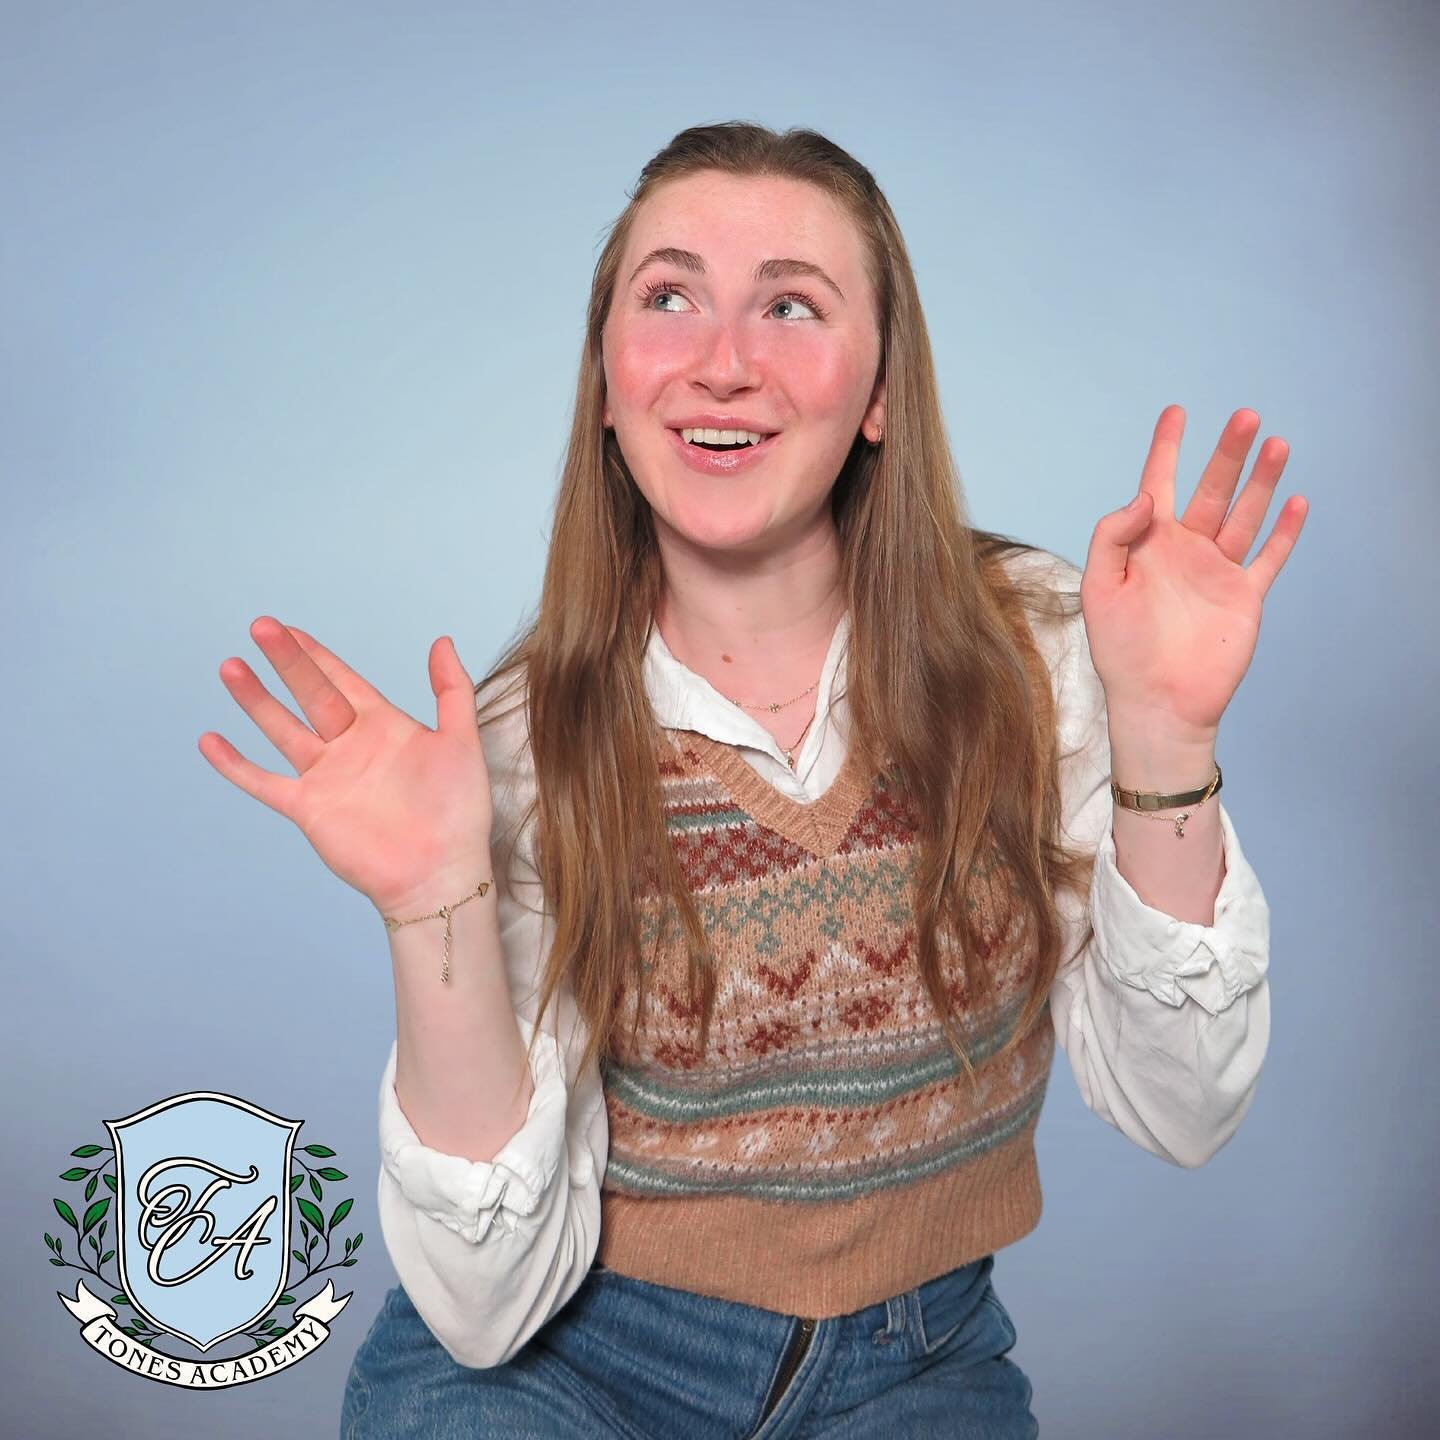 you don&rsquo;t know a theater kid until you&rsquo;ve met hali. she&rsquo;s rachel berry reincarnate (but only the good parts). try not to cry when she serenades you at #tonesacademy (we will be 🥲🥲🥲)

may 3 at 7:30pm
call auditorium
link for tix i